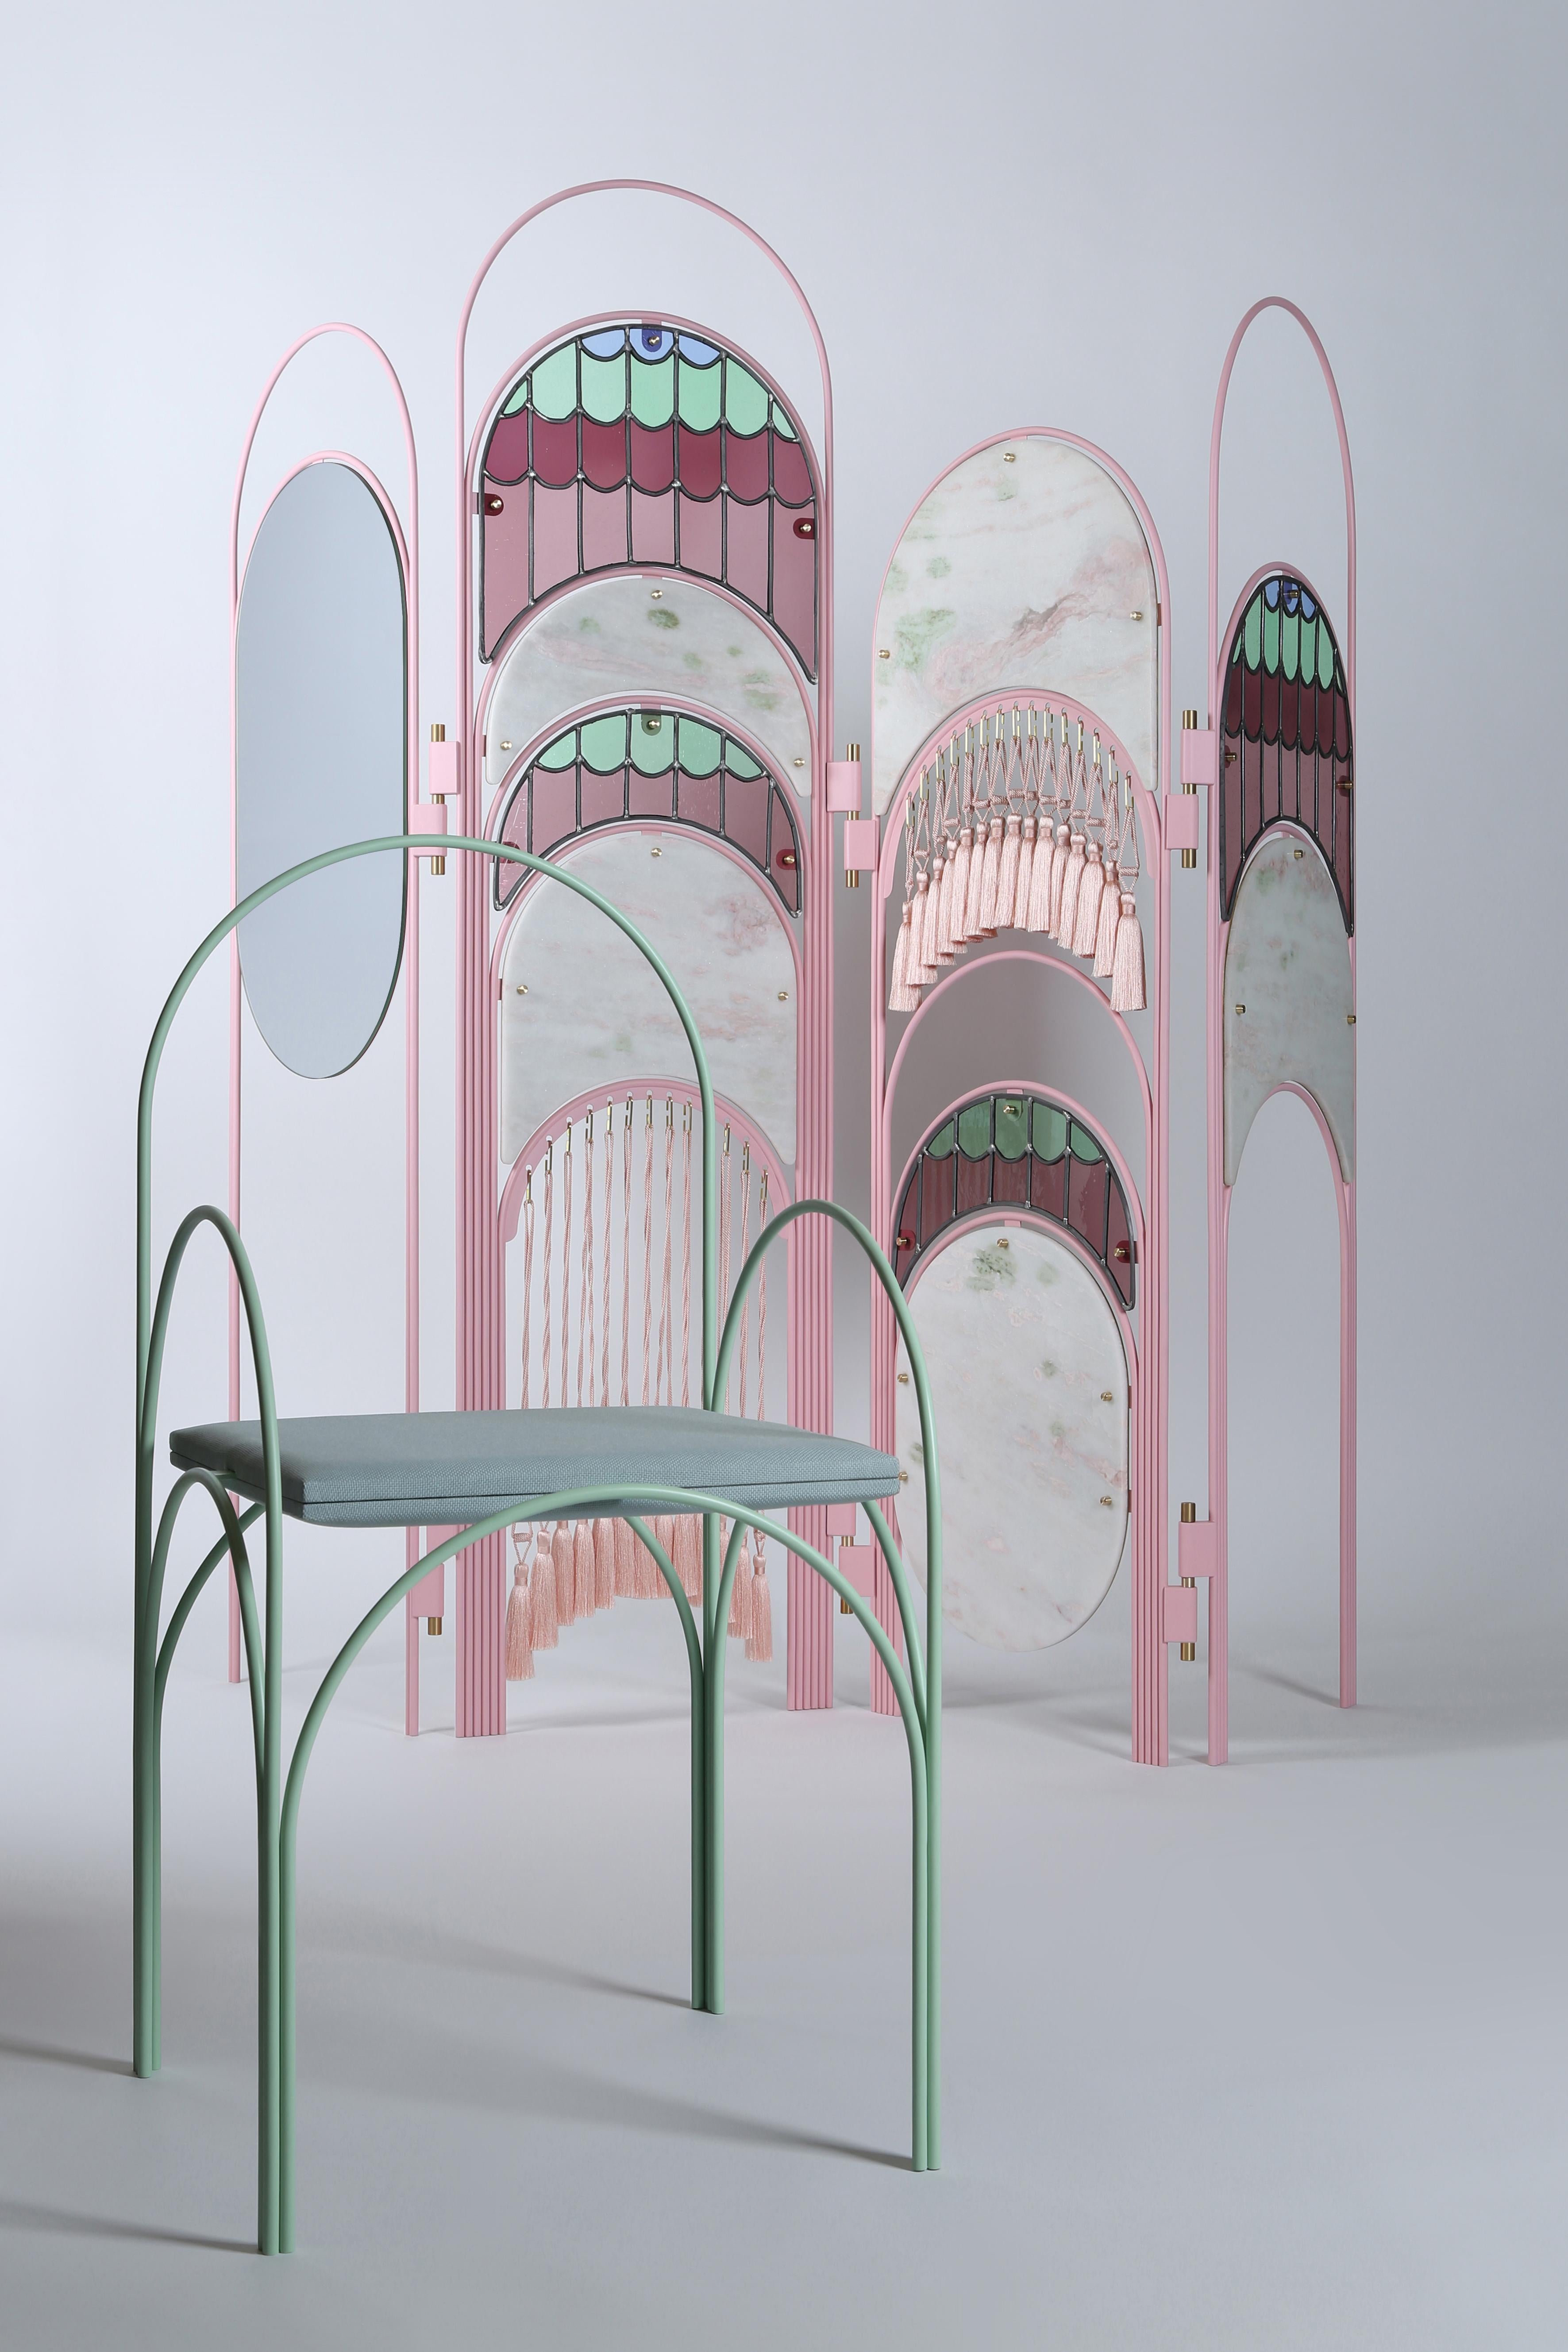 Hawa Beirut screen by Richard Yasmine
Materials: Structure in powder coated metal, brushed brass, treated pink marble, stained glass, silk
tassels, Mirror
Dimensions: H 180 x L 201 x D 5 cm

HAWA Beirut, a collection of very light or airy